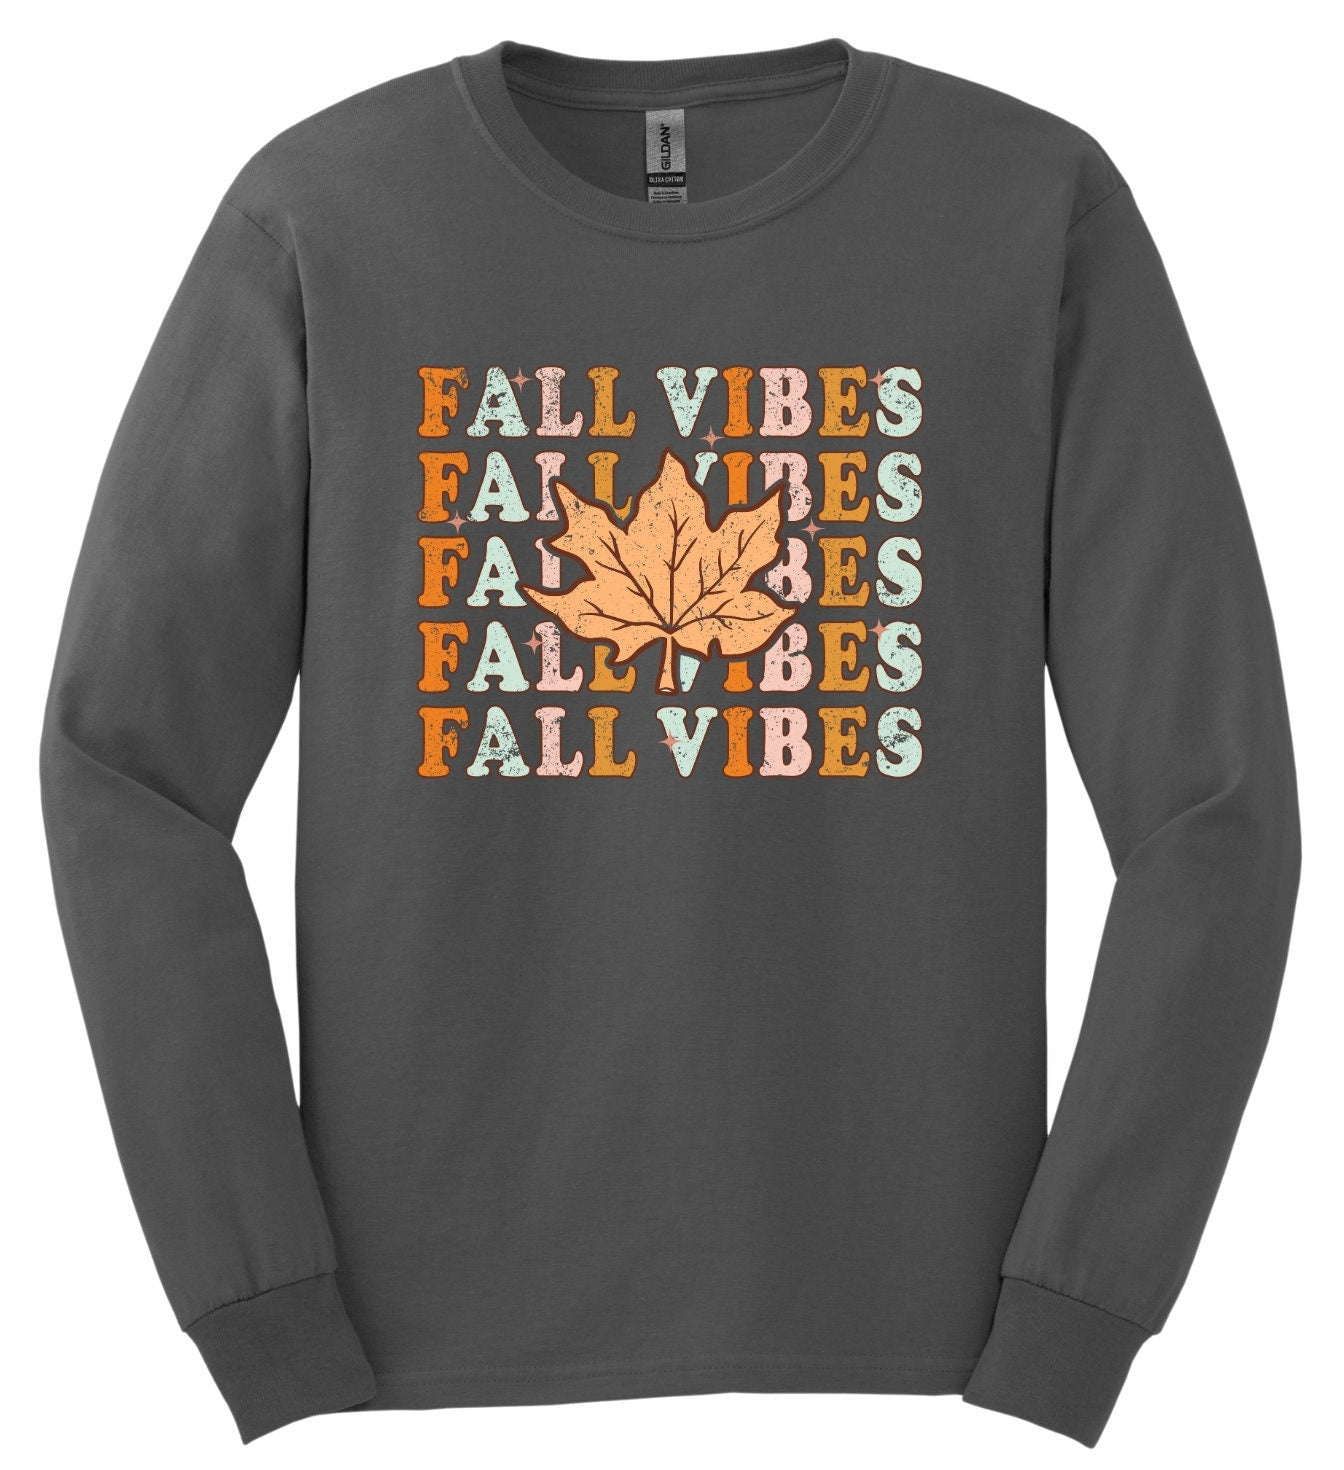 Fall Vibes; Long Sleeve and Short Sleeve Cotton Shirt, Adult Tee